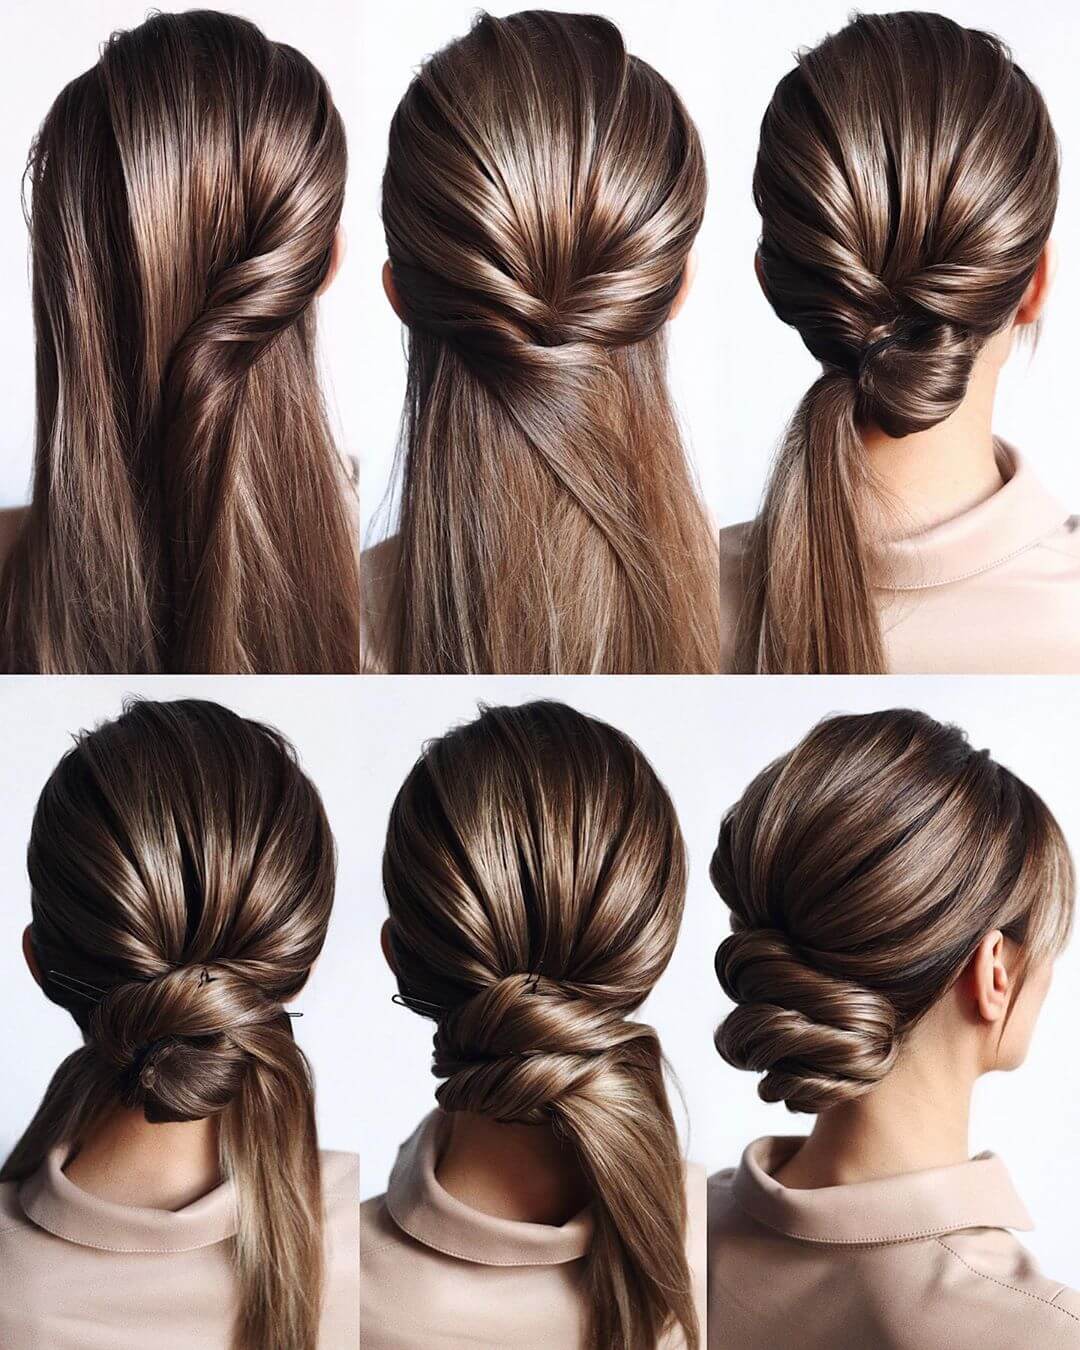 30 Easy Hairstyles for Long Hair in 10 Seconds or Less